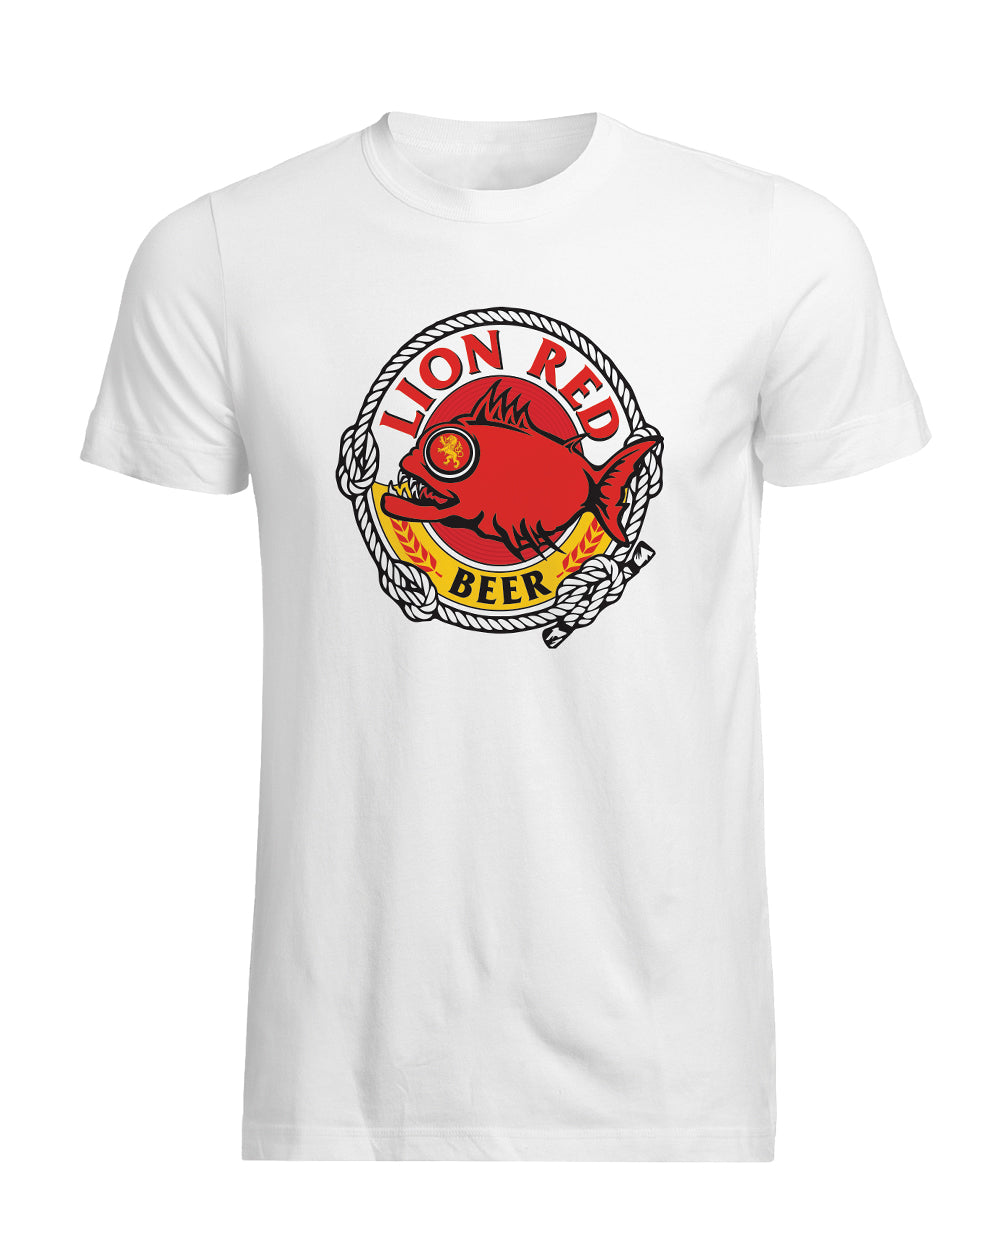 Lion Red Fishing Tee -  Beer Gear Apparel & Merchandise - Speights - Lion Red - VB - Tokyo Dy merch